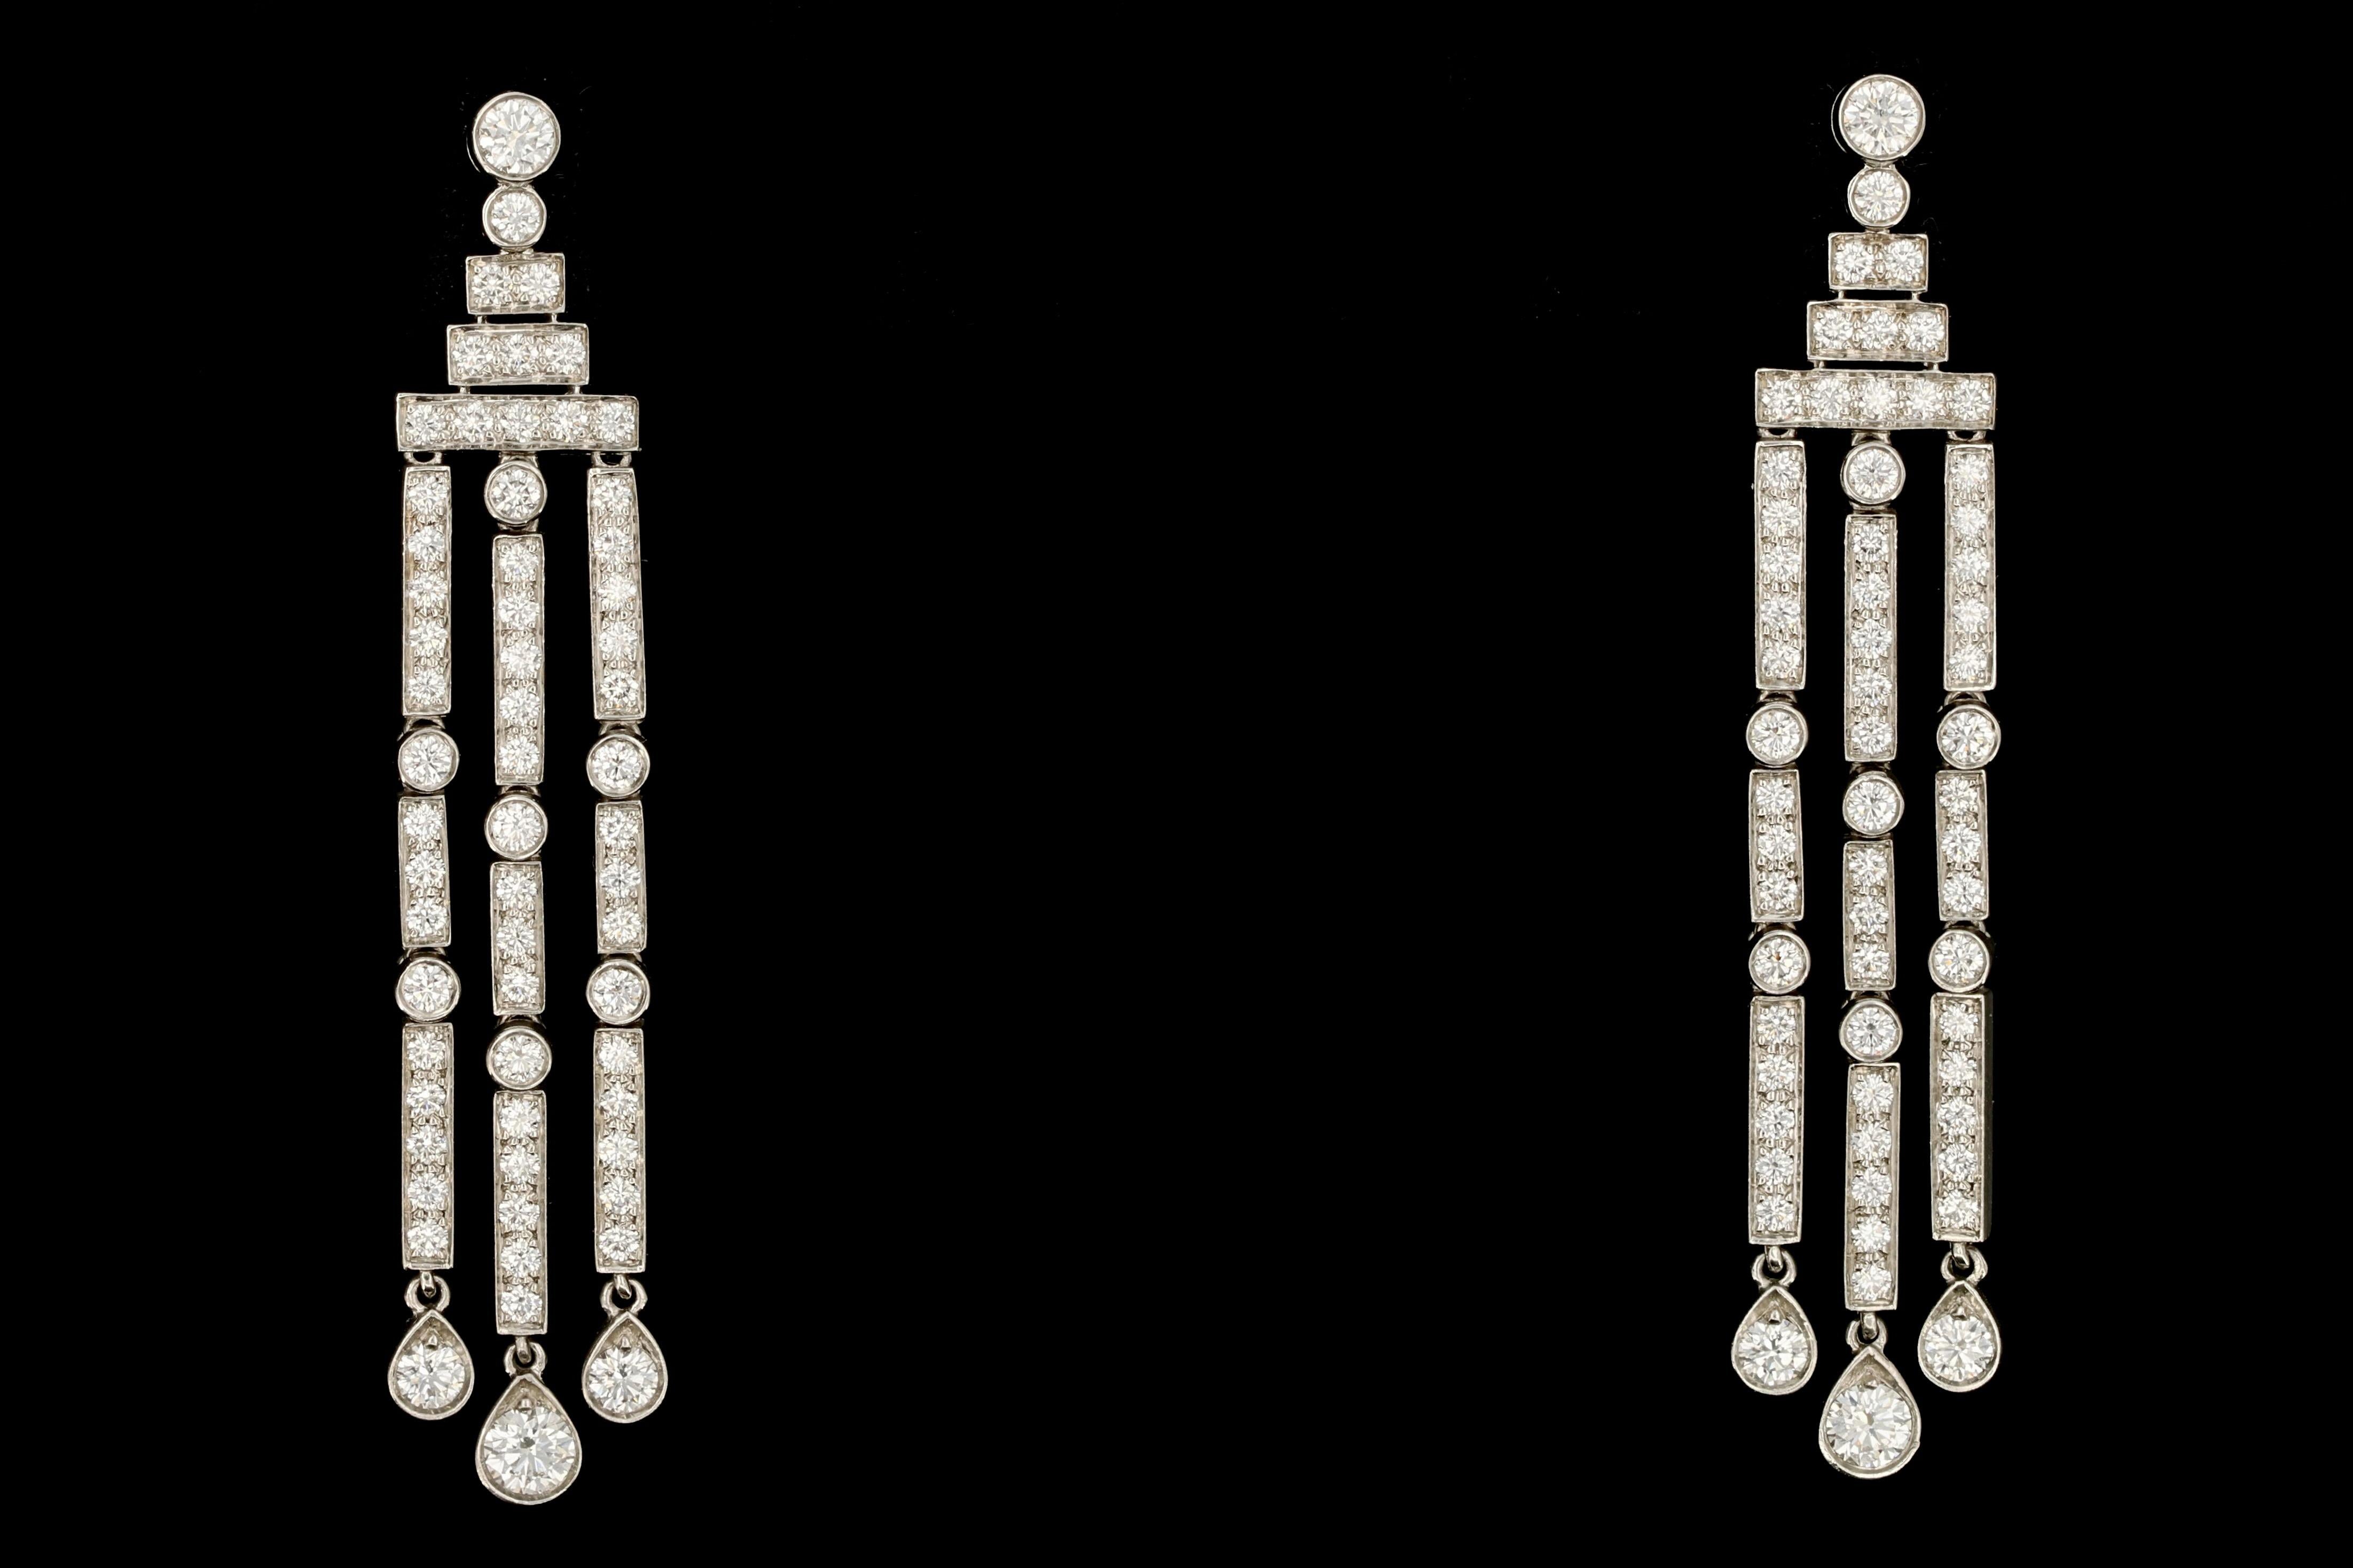 Era: c.2013

Hallmarks: Tiffany & Co PT 950 on earrings and backs

Composition: 95% Platinum

Primary Stone: Diamonds

Stone Carat: 2.15 carats total

Earring Measurements: 2